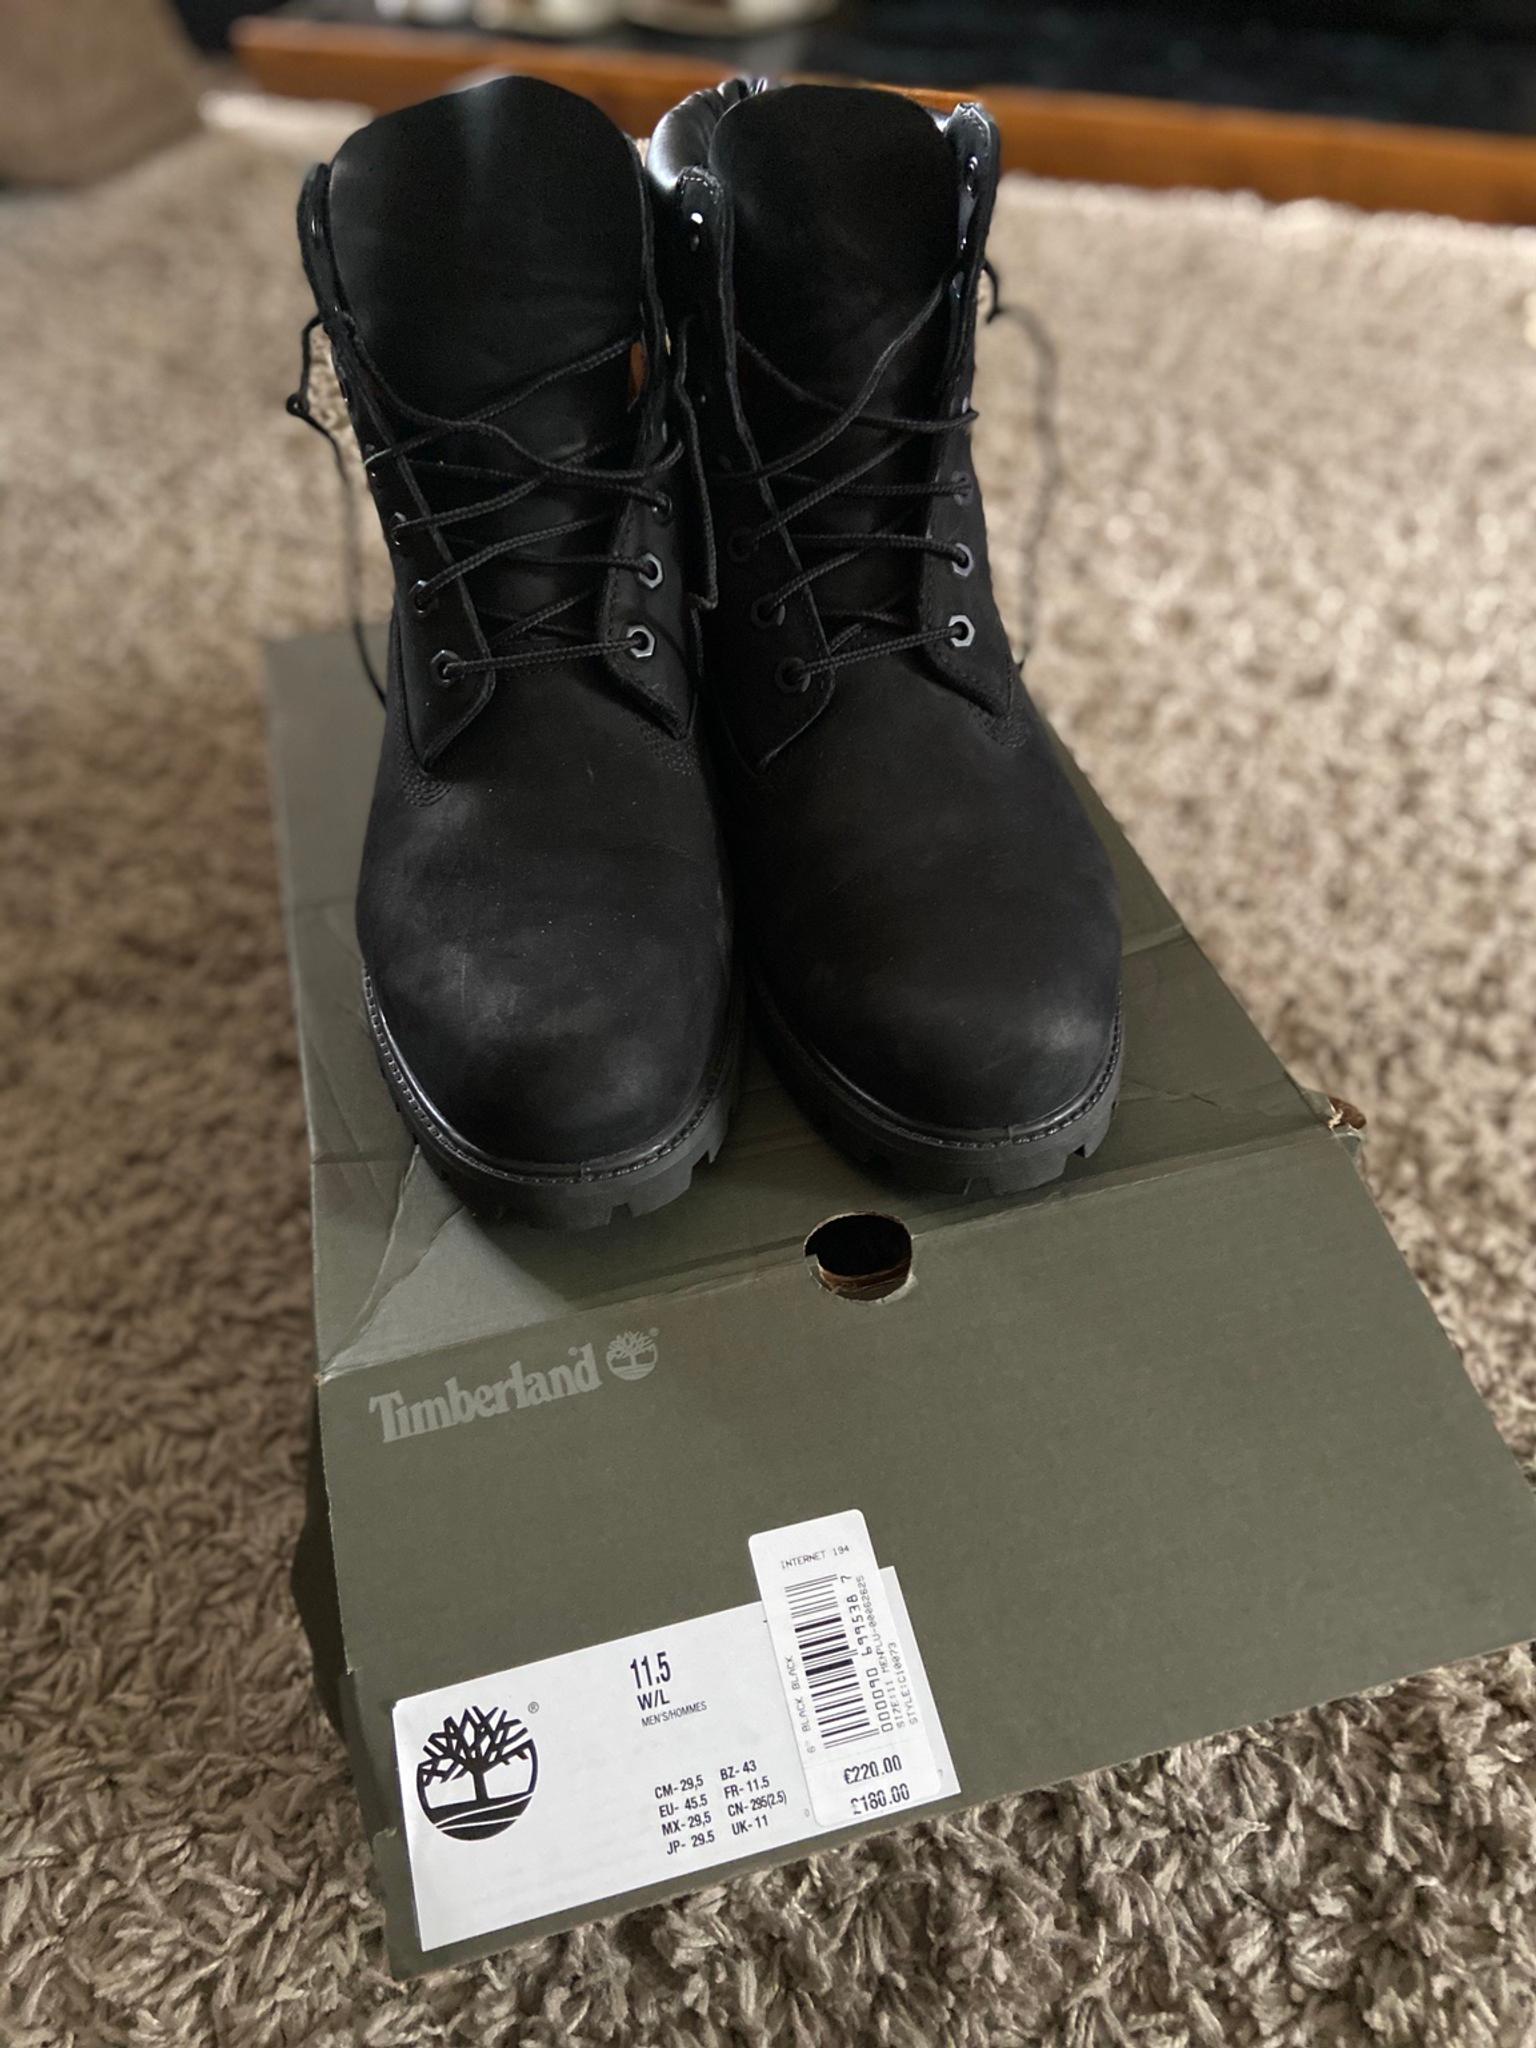 Black timberland boots in WS1 Walsall 